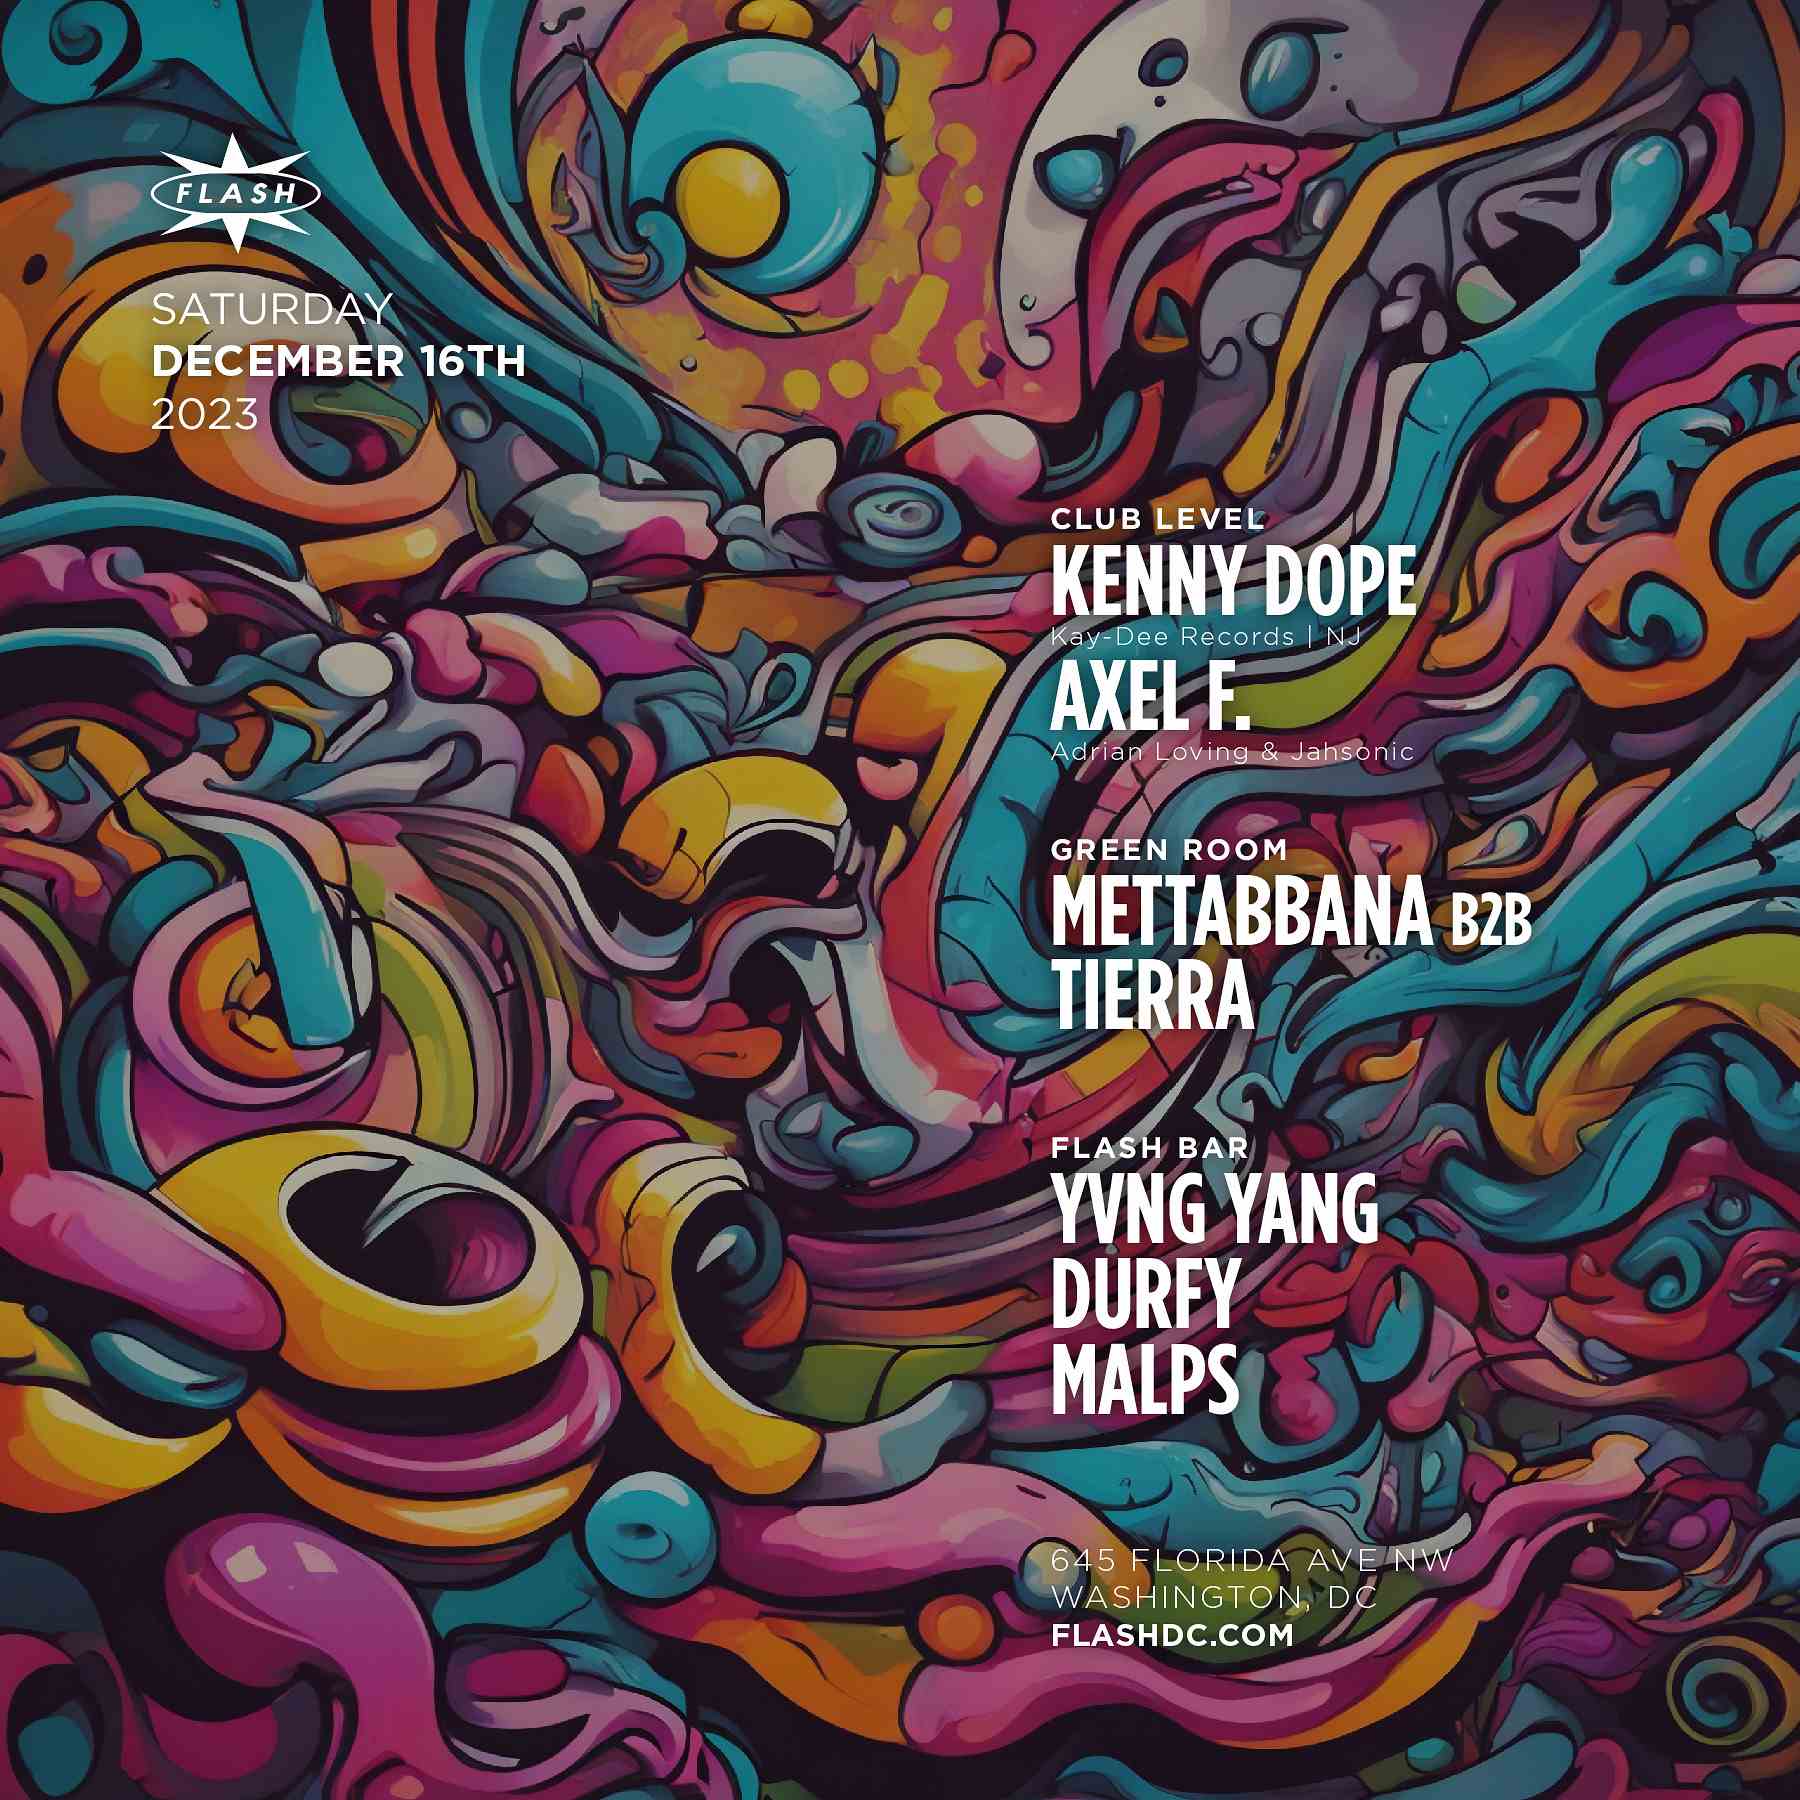 Kenny Dope event flyer